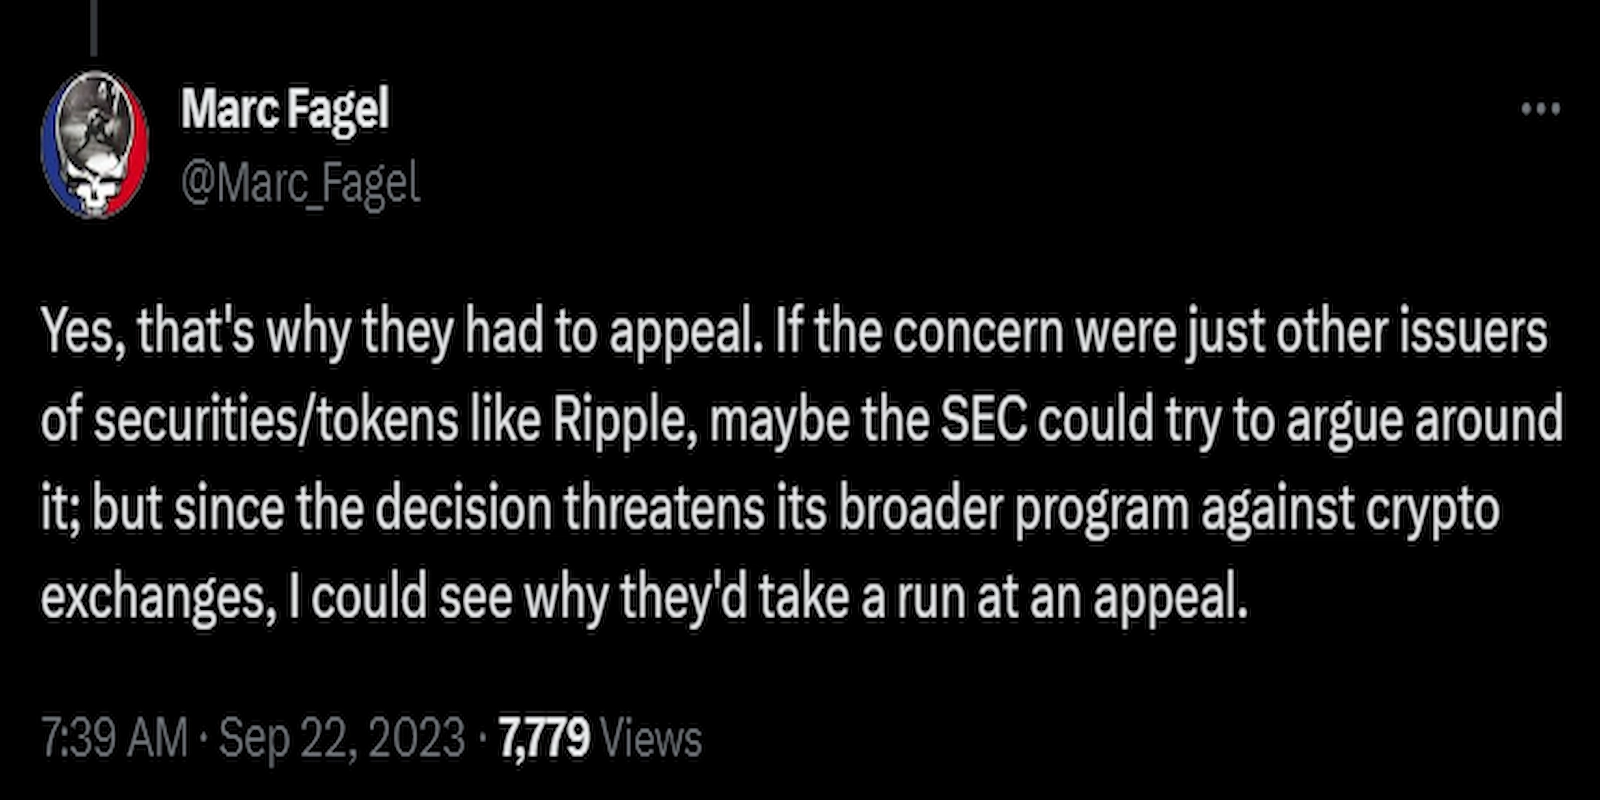 Marc Fagel commented on the reason why the SEC might appeal the XRP lawsuit.